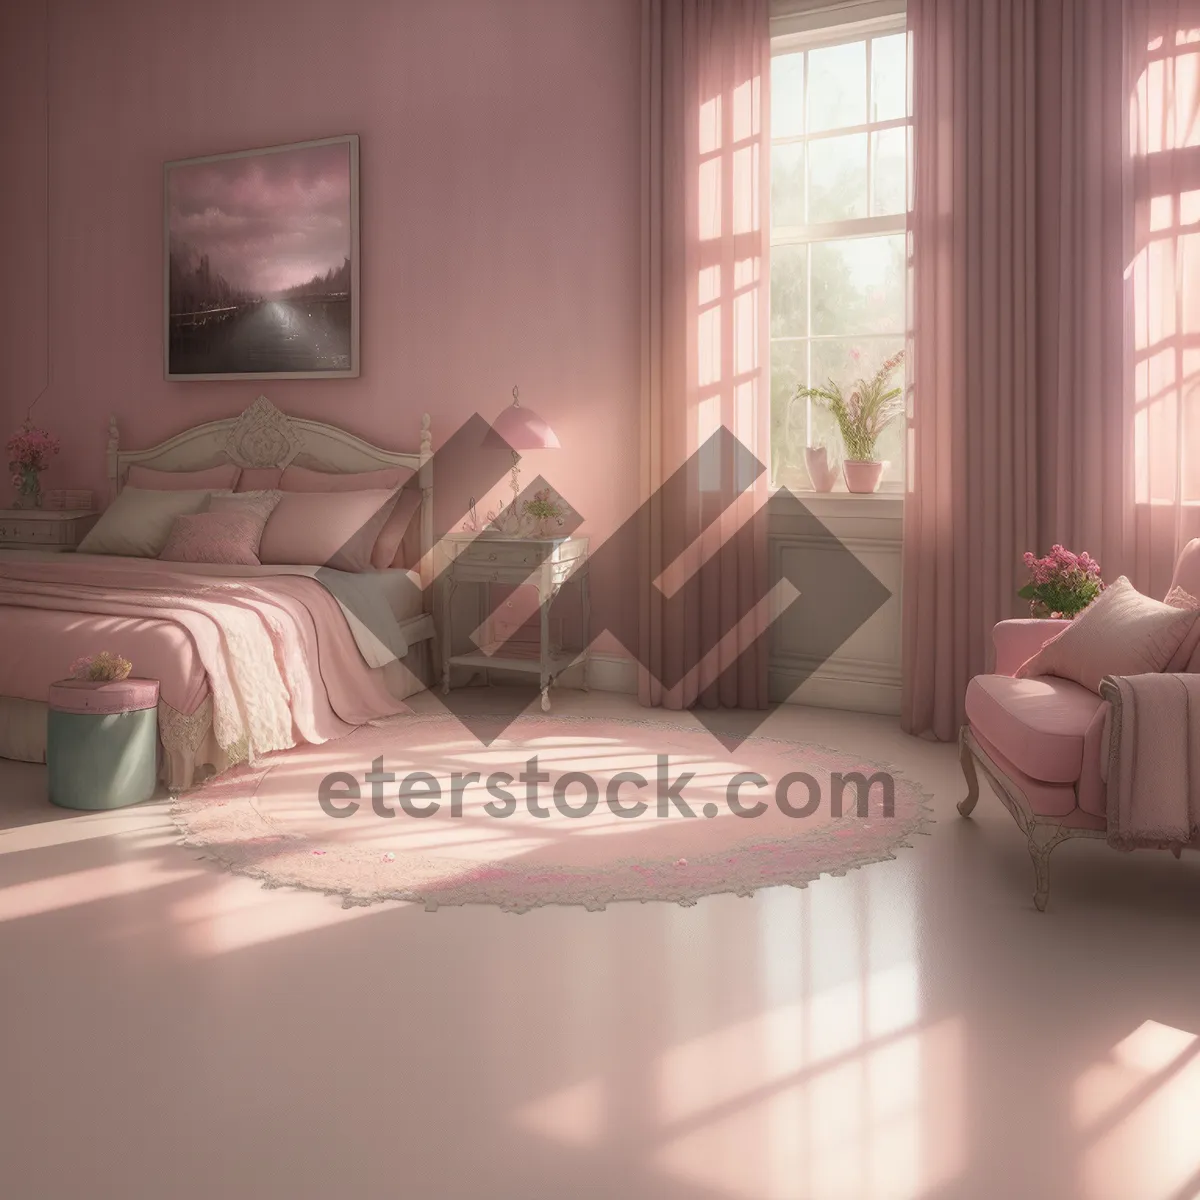 Picture of Modern Bedroom Interior with Stylish Furniture and Cozy Lighting